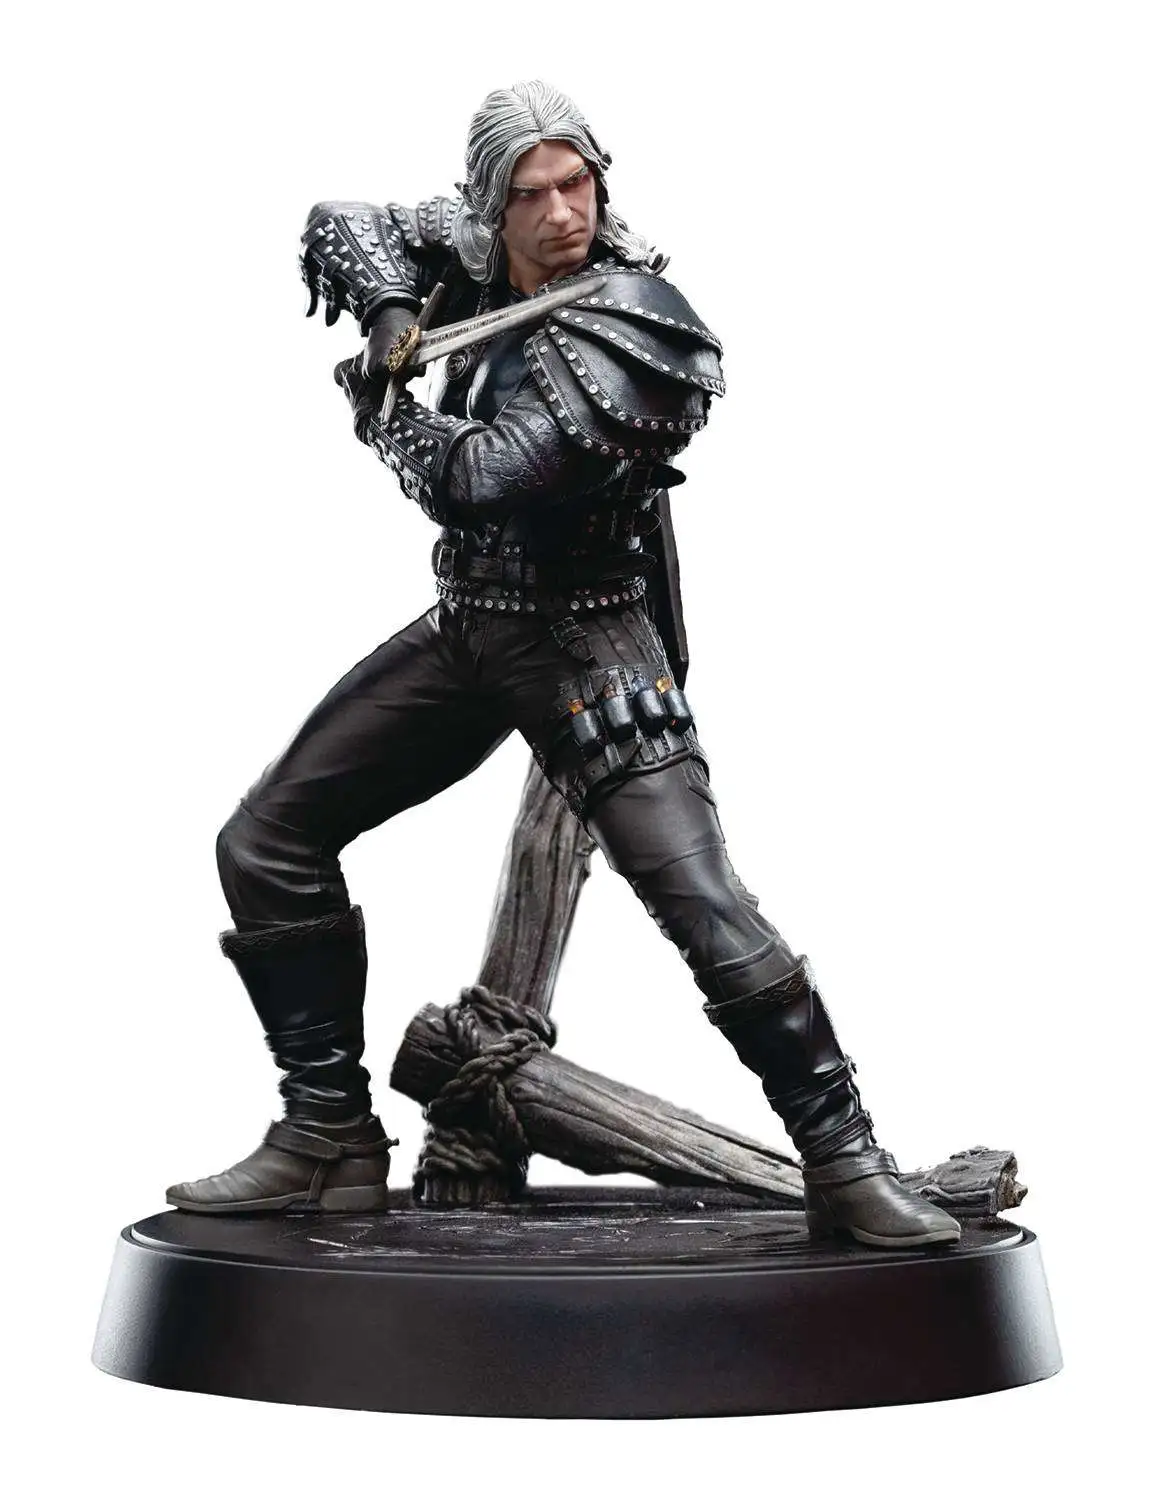 The Witcher Geralt of Rivia 9-Inch PVC Statue Figure [Season 2] (Pre-Order ships August)